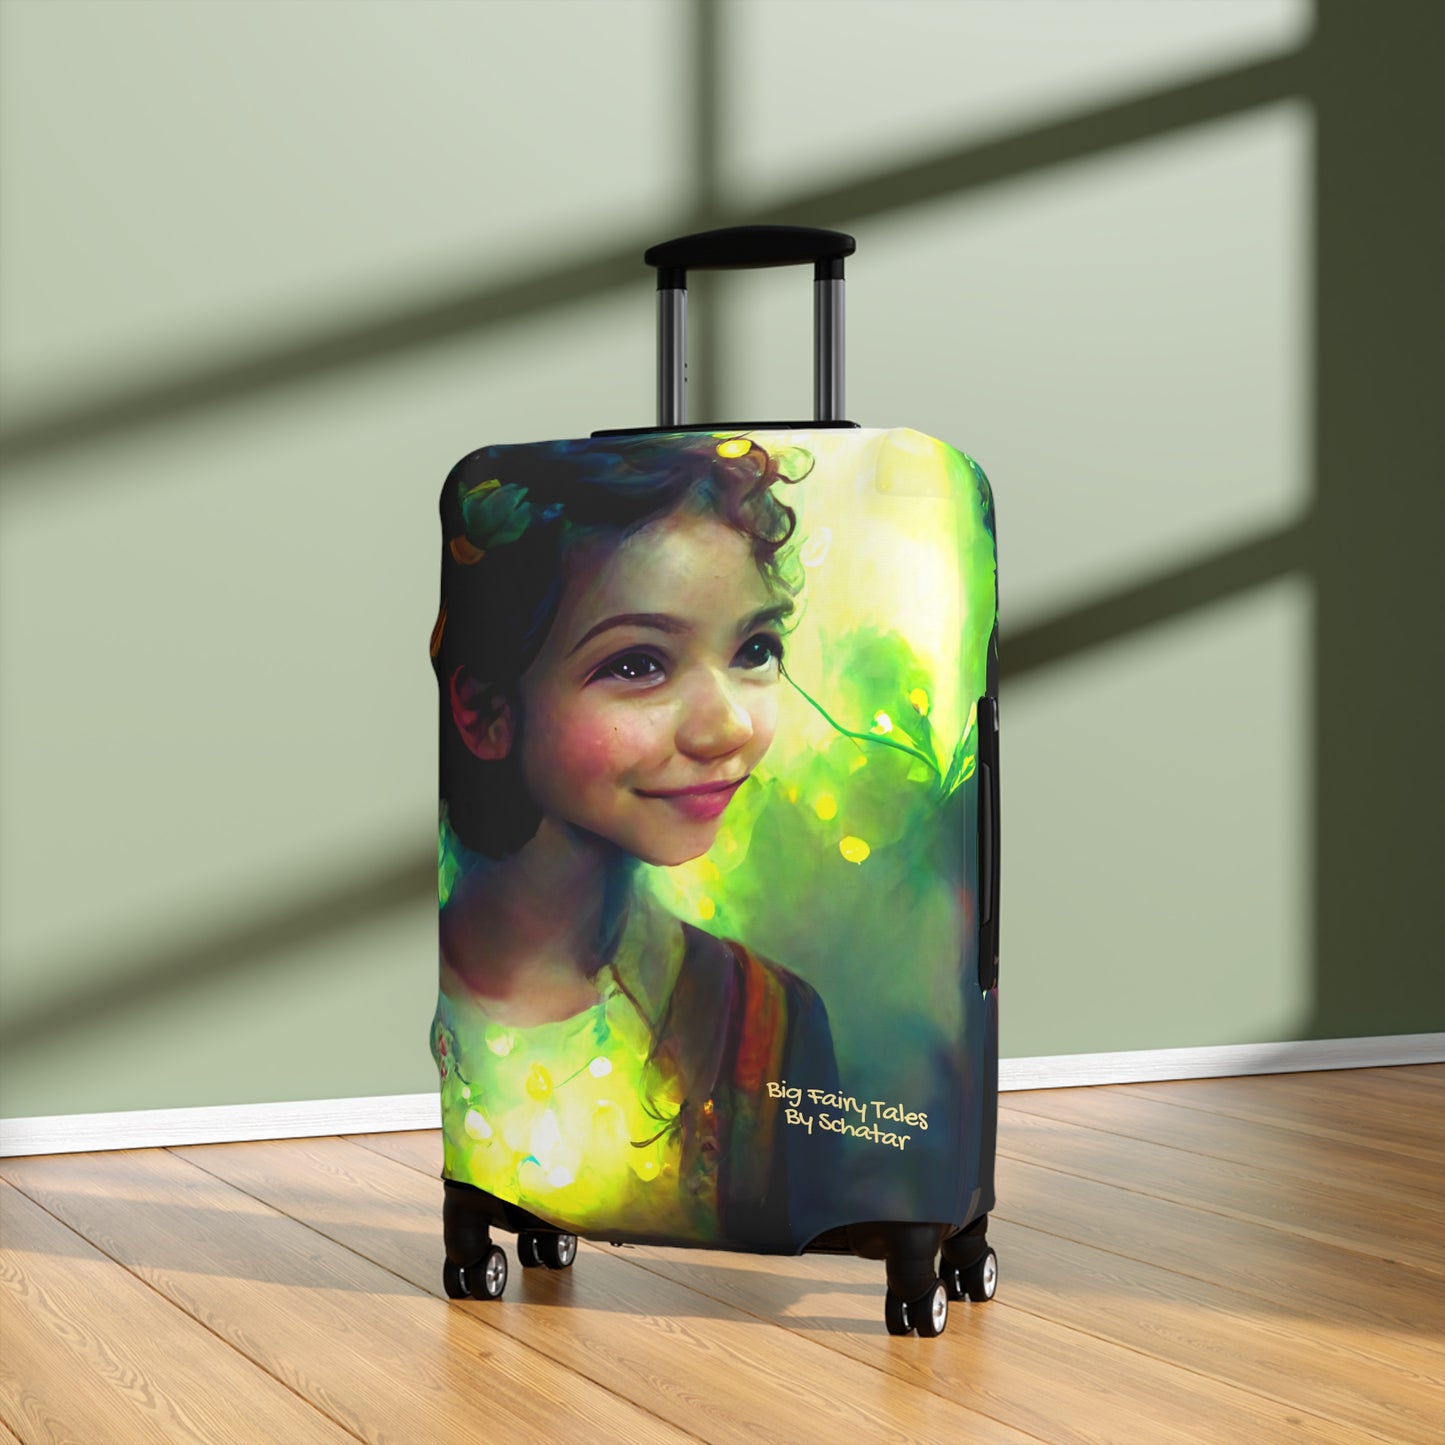 Big Fairy Tales By Jackies Beanstalk Luggage Cover